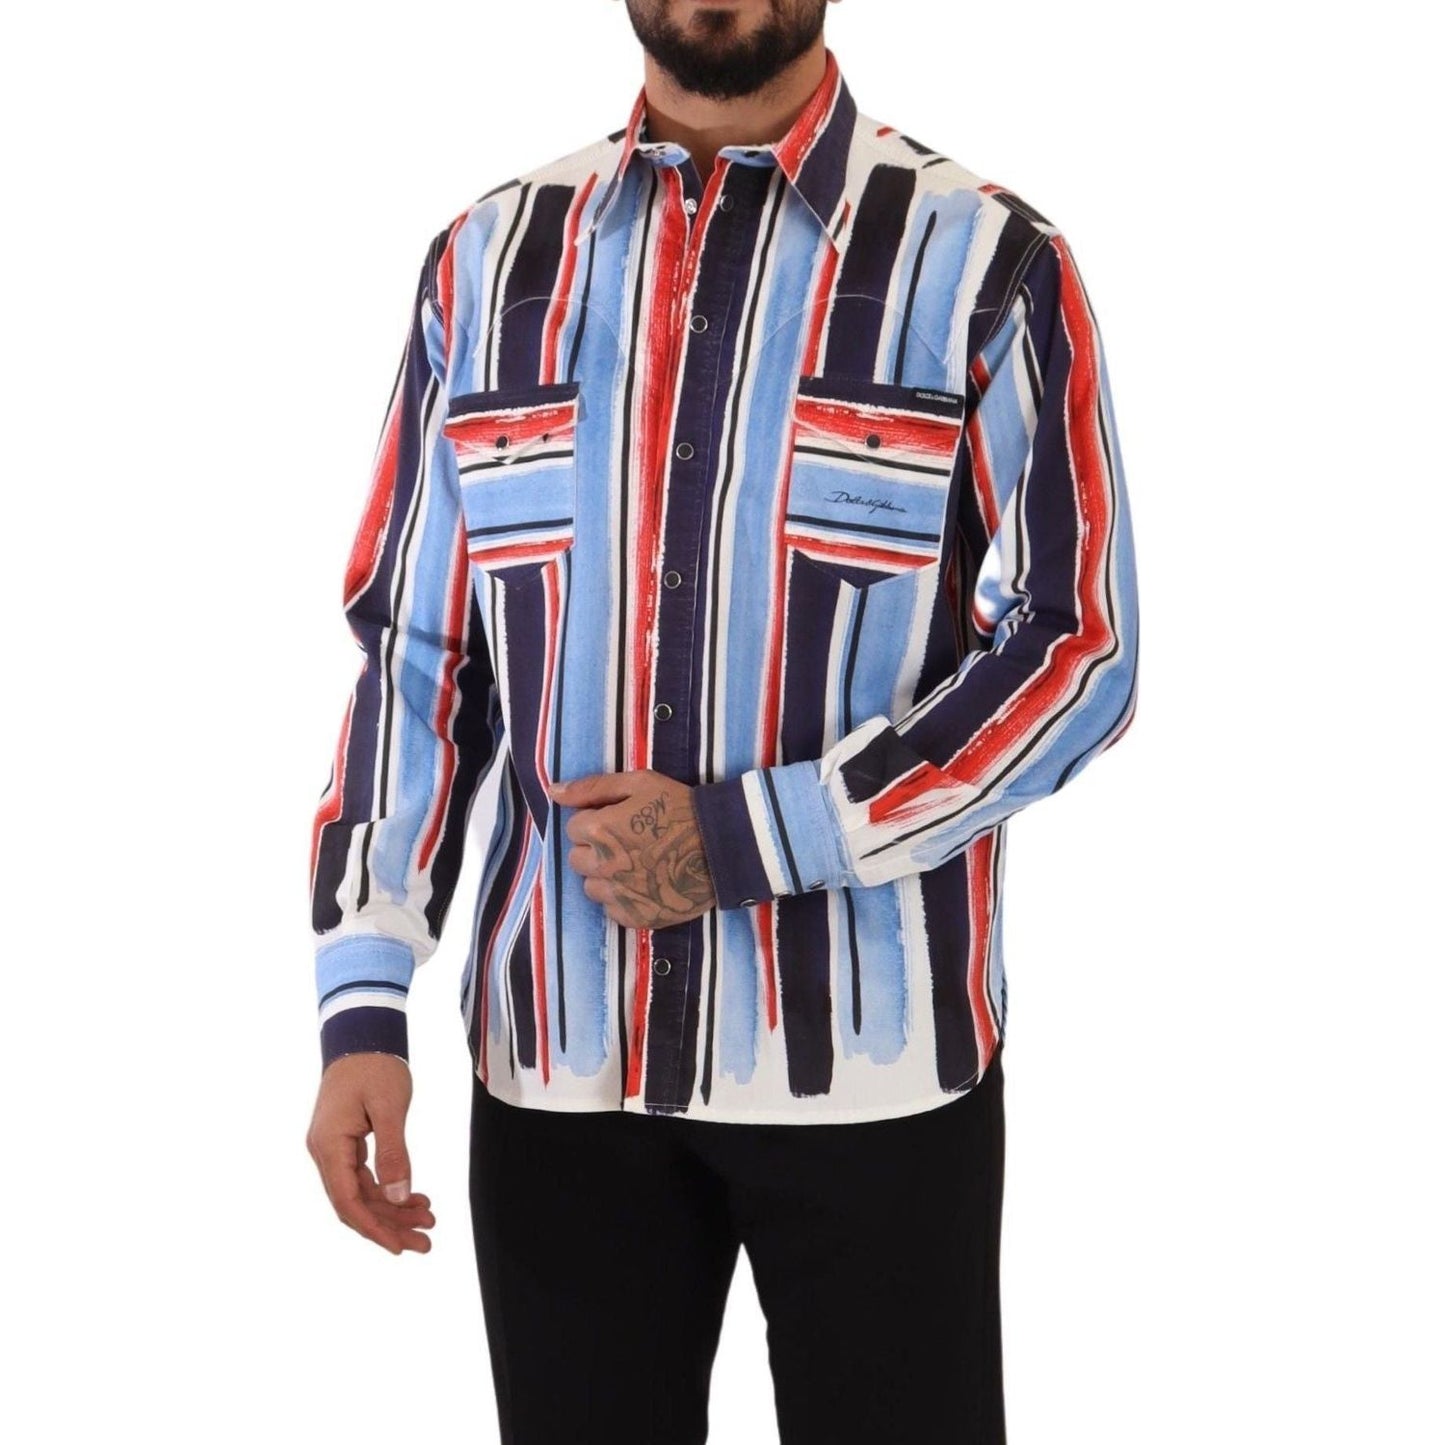 Dolce & Gabbana Elegant Striped Cotton Shirt with Pockets red-striped-long-sleeve-cotton-shirt-blue